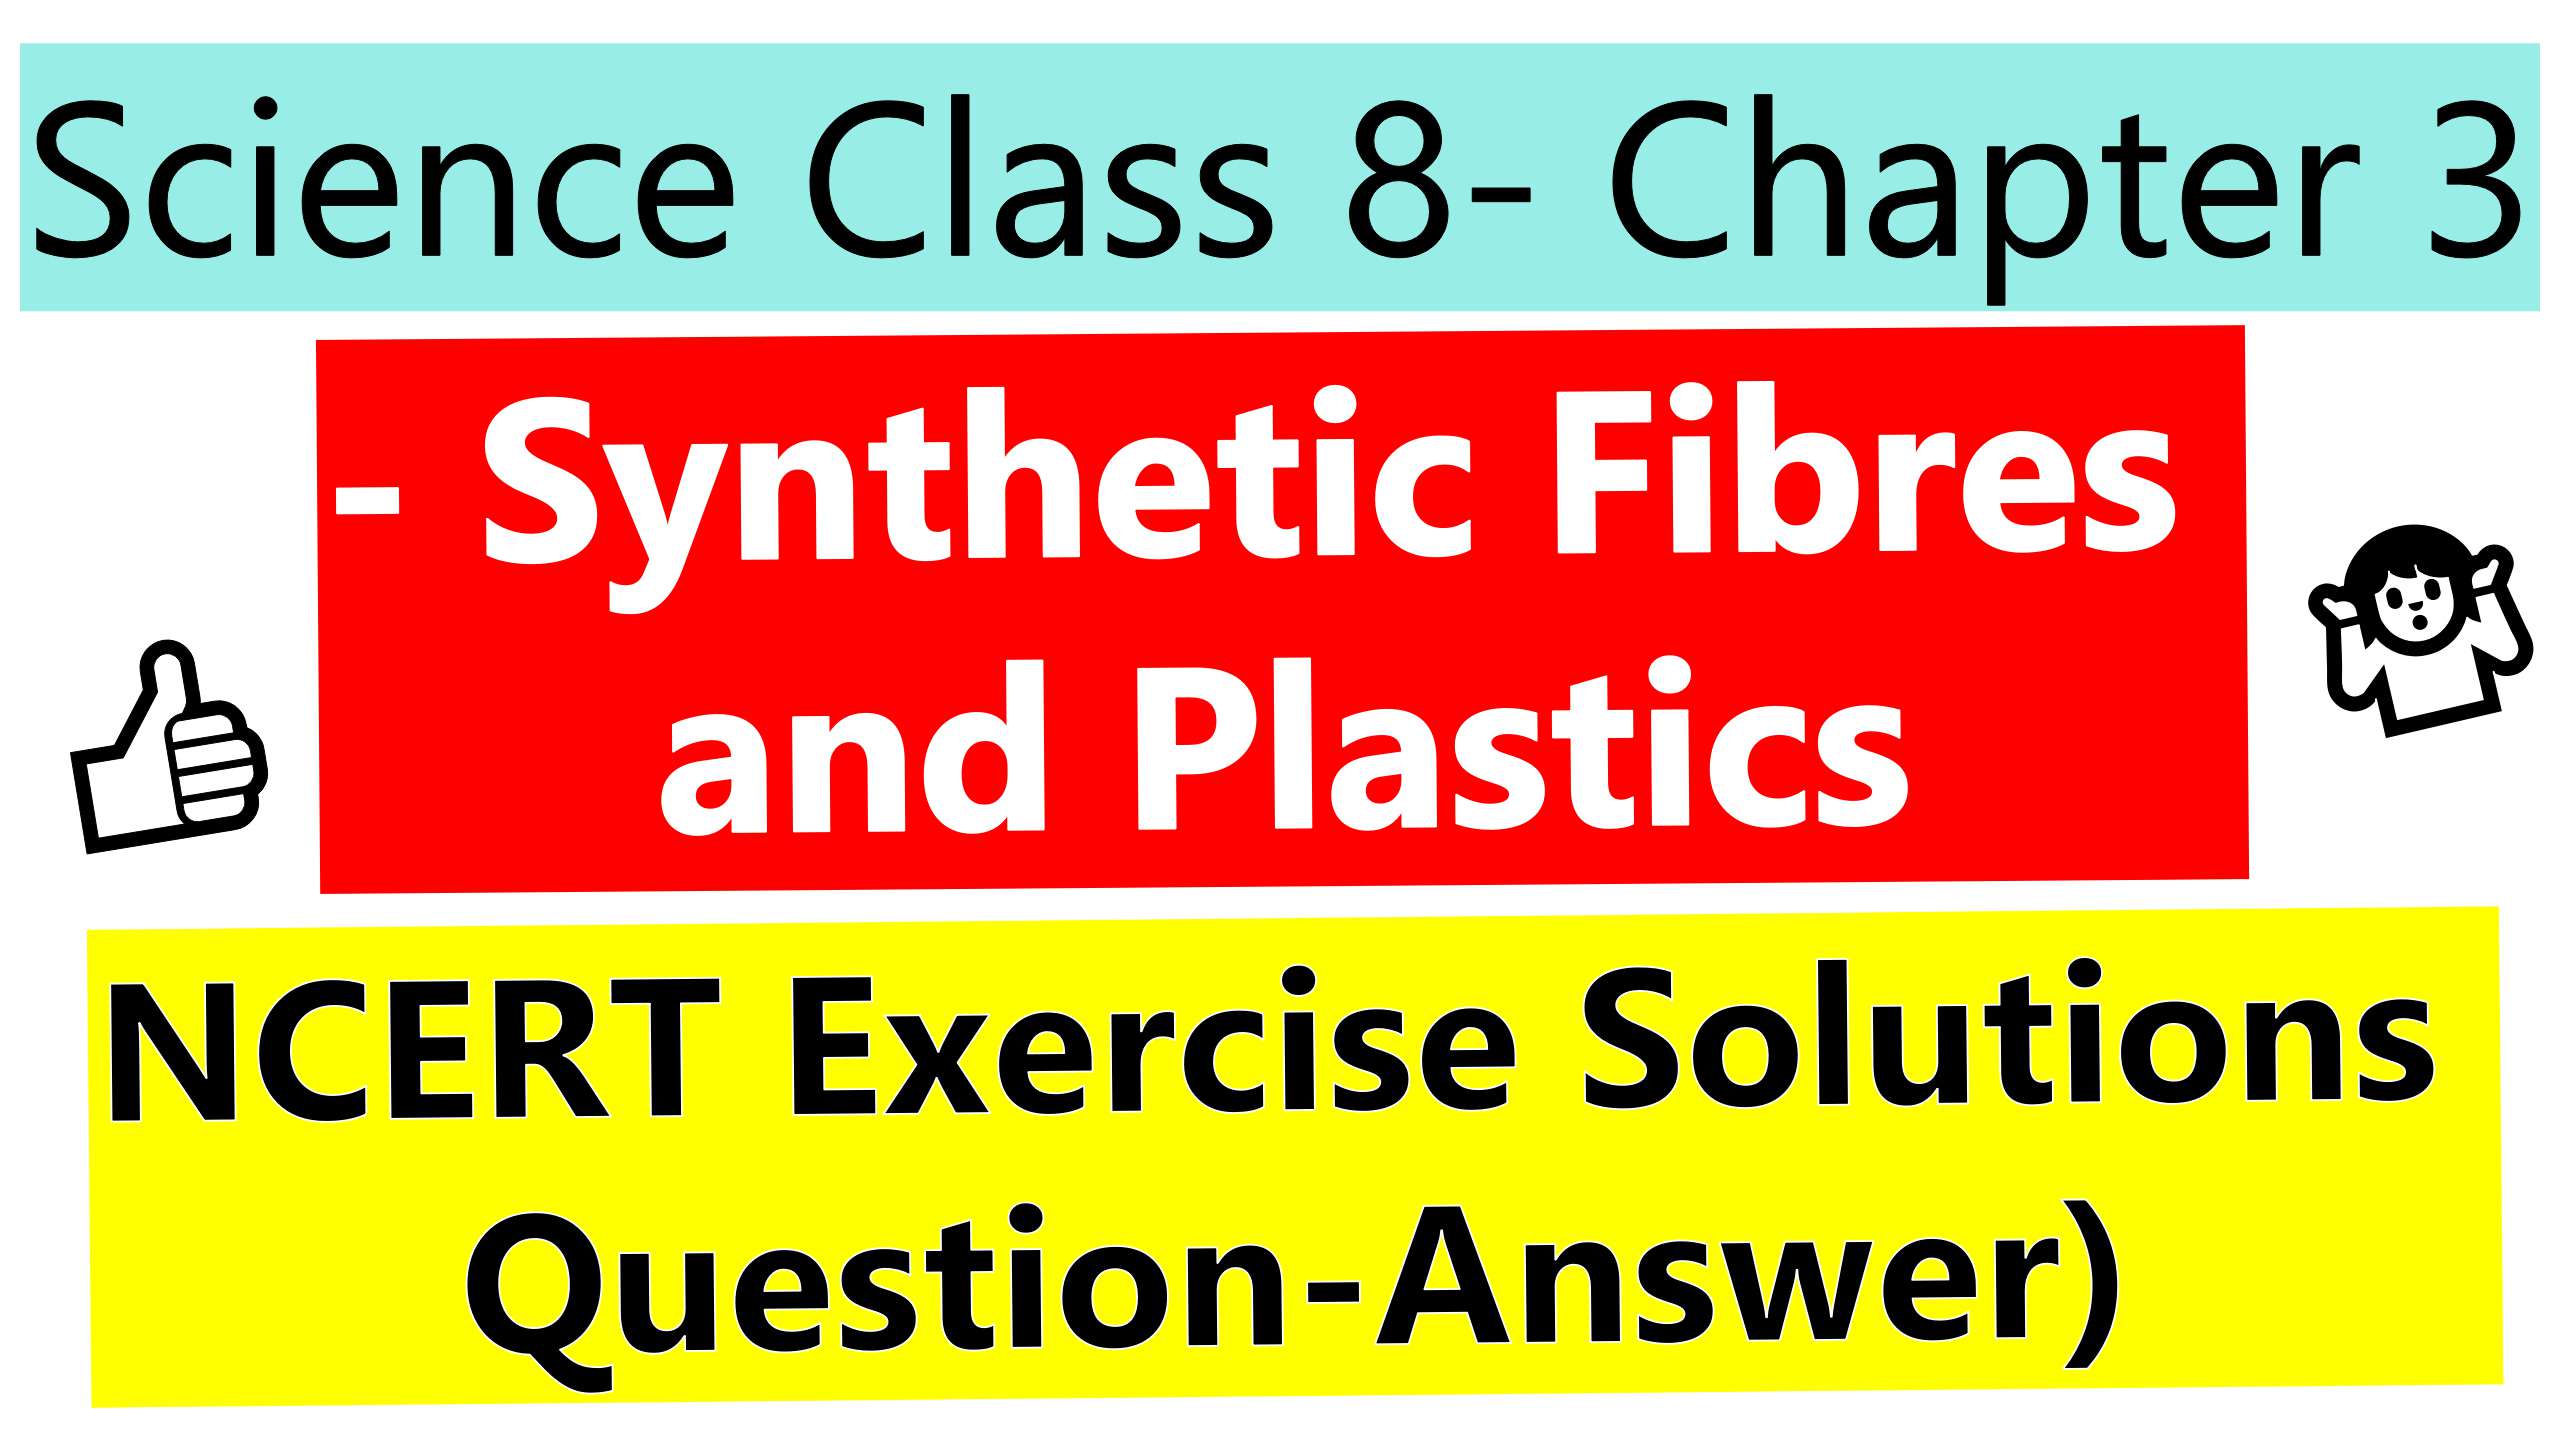 Science Class 8- Chapter 3- Synthetic Fibres and Plastics- NCERT Exercise Solutions (Question-Answer)